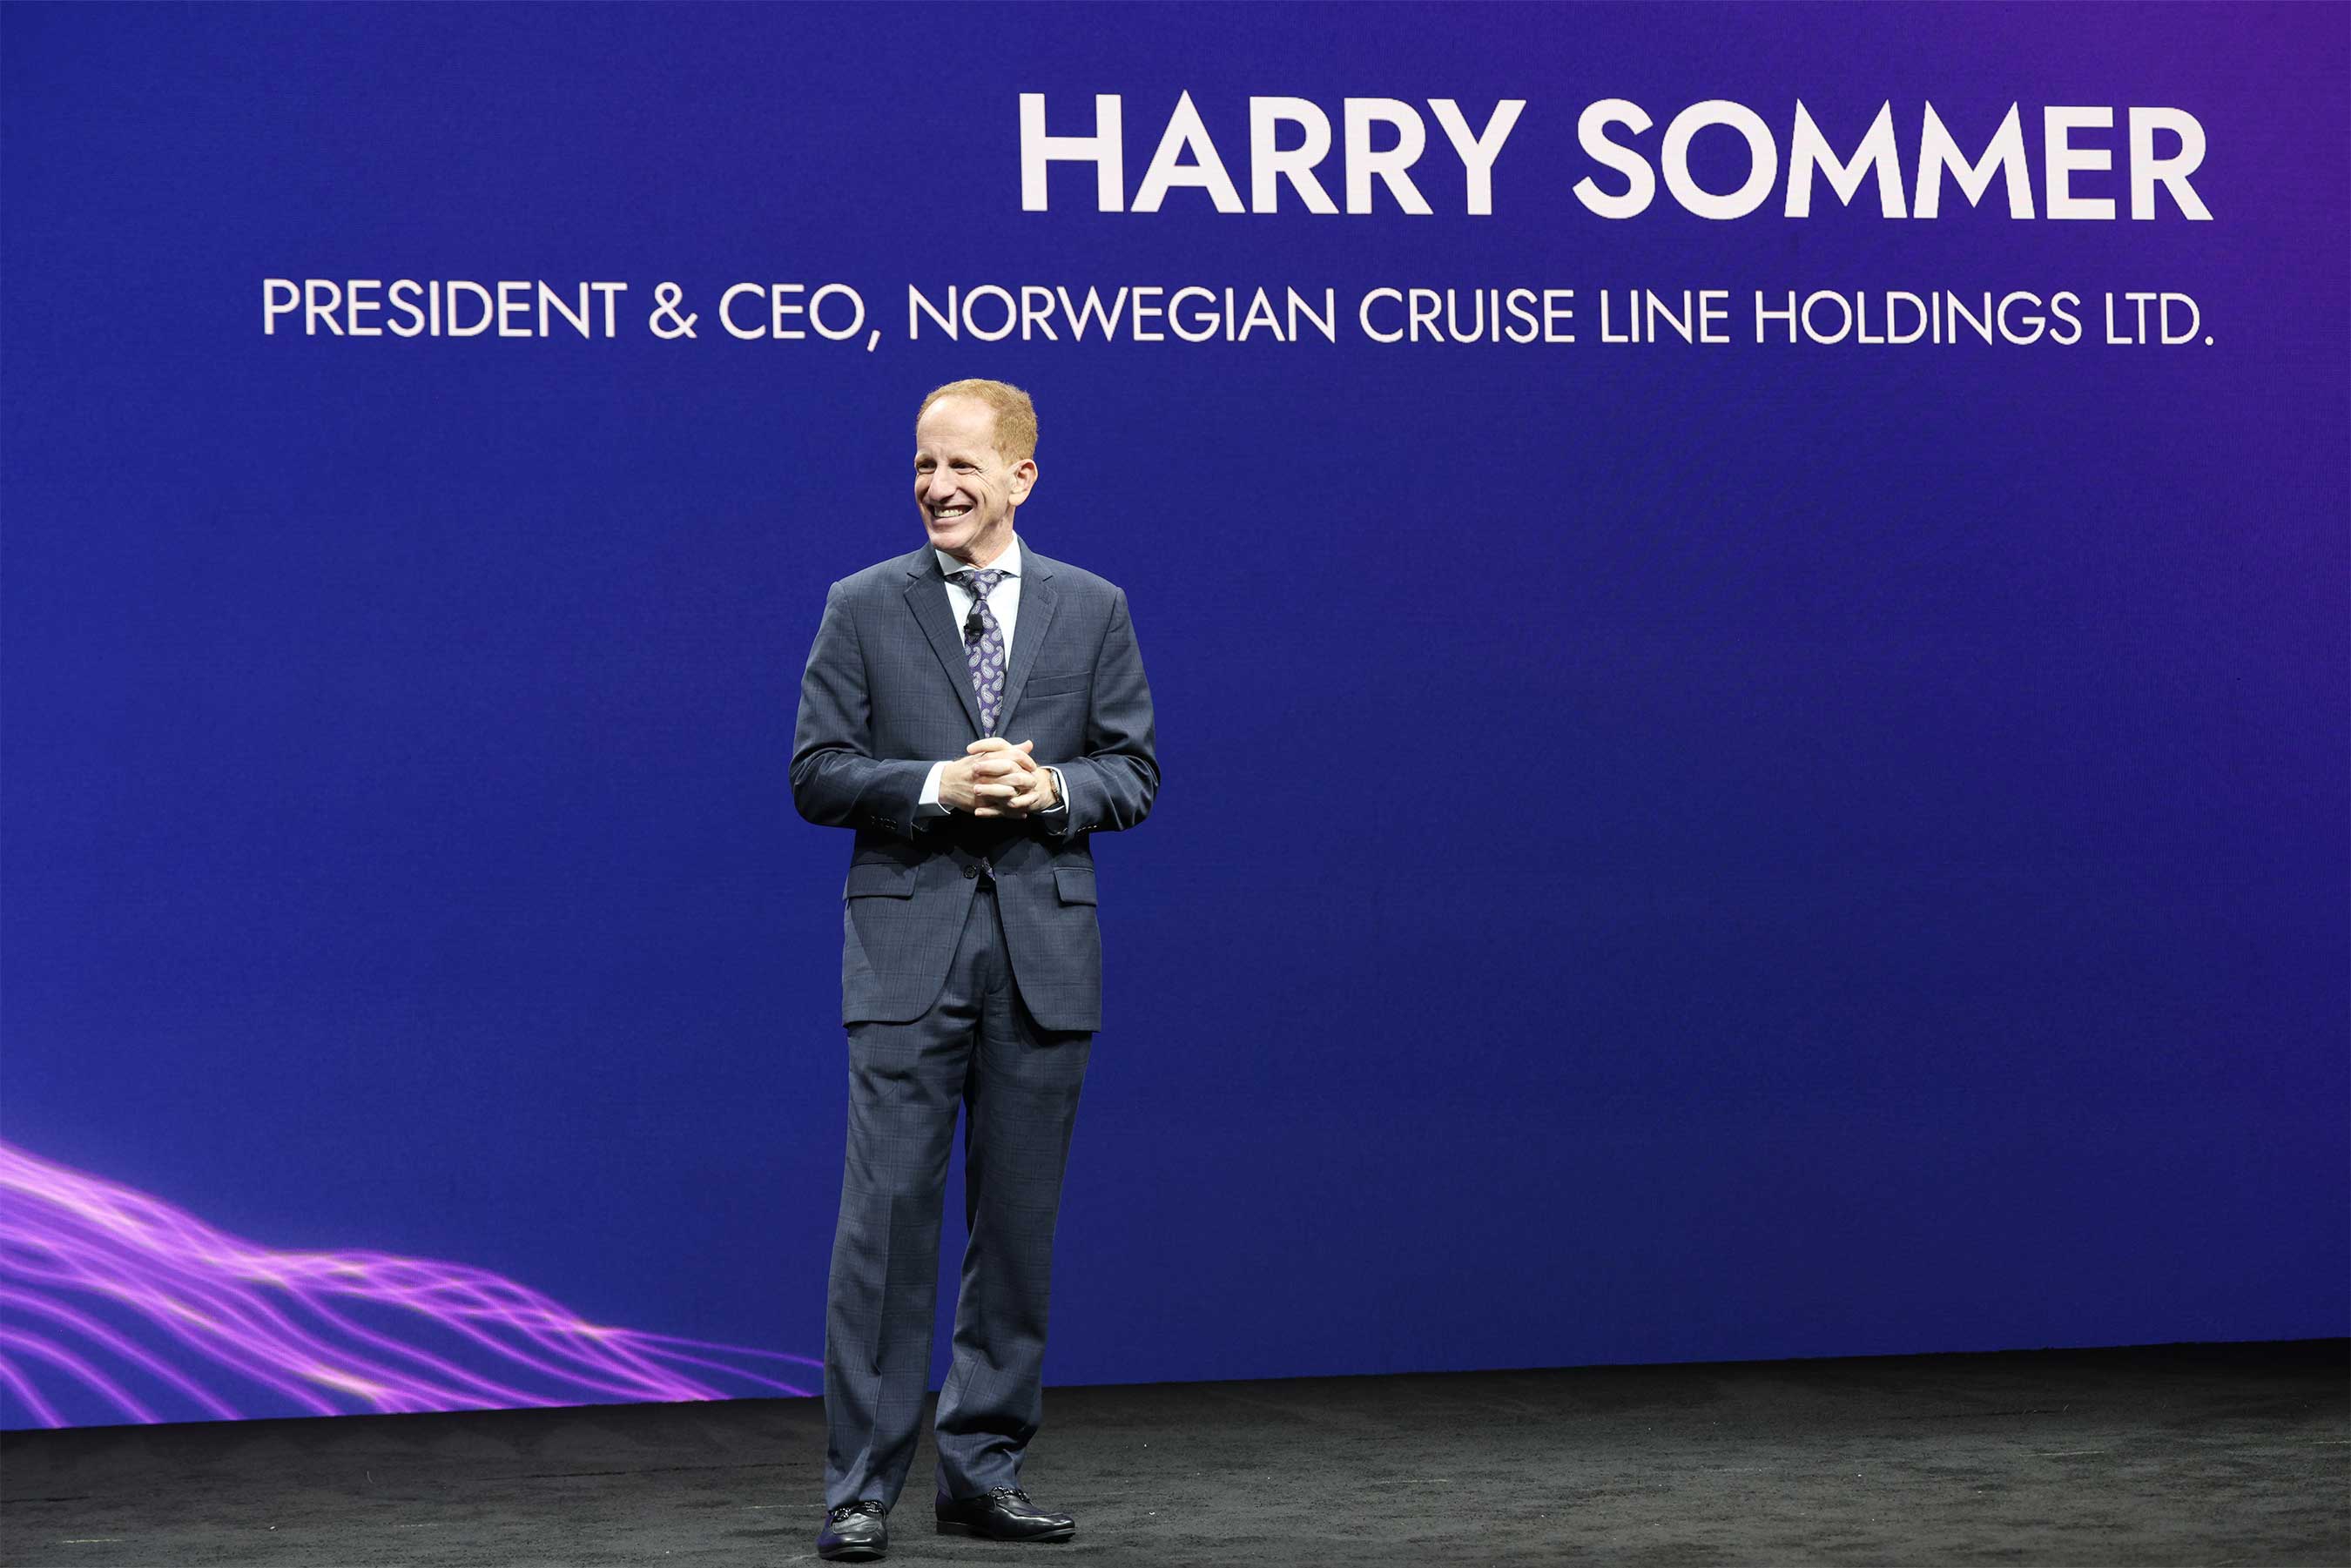 Harry Sommer, President and CEO of Norwegian Cruise Line Holdings Ltd., joins the stage for Norwegian Viva’s christening ceremony in the Company’s LEED Gold-certified cruise terminal in Miami.